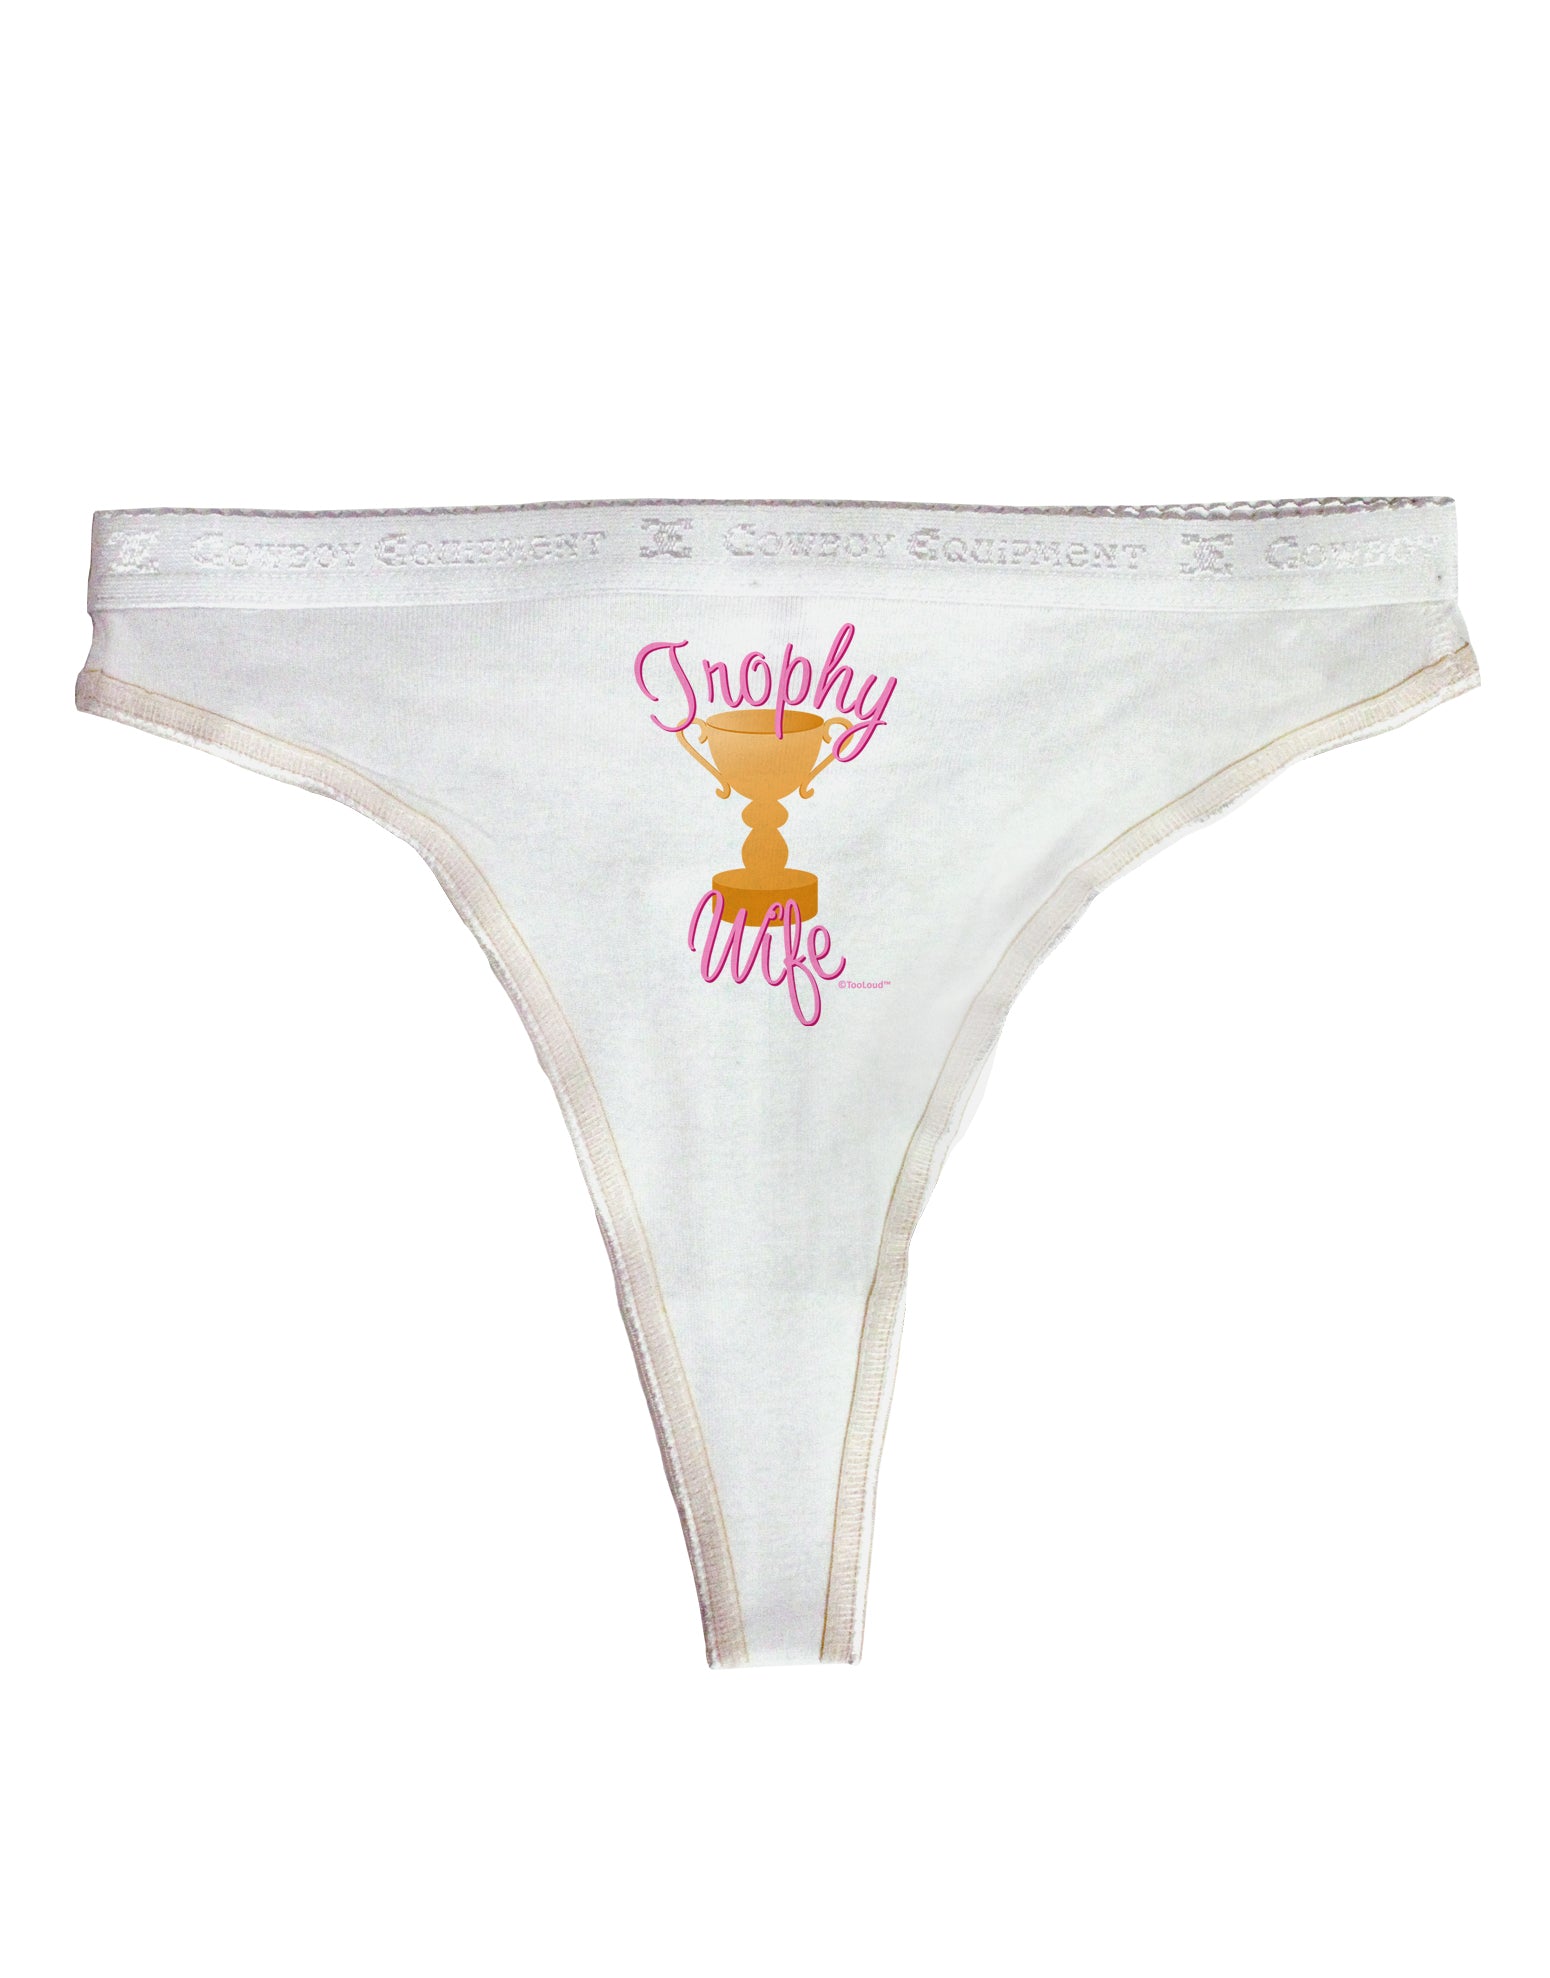 Trophy Wife Design Womens Thong Underwear by TooLoud - Davson Sales